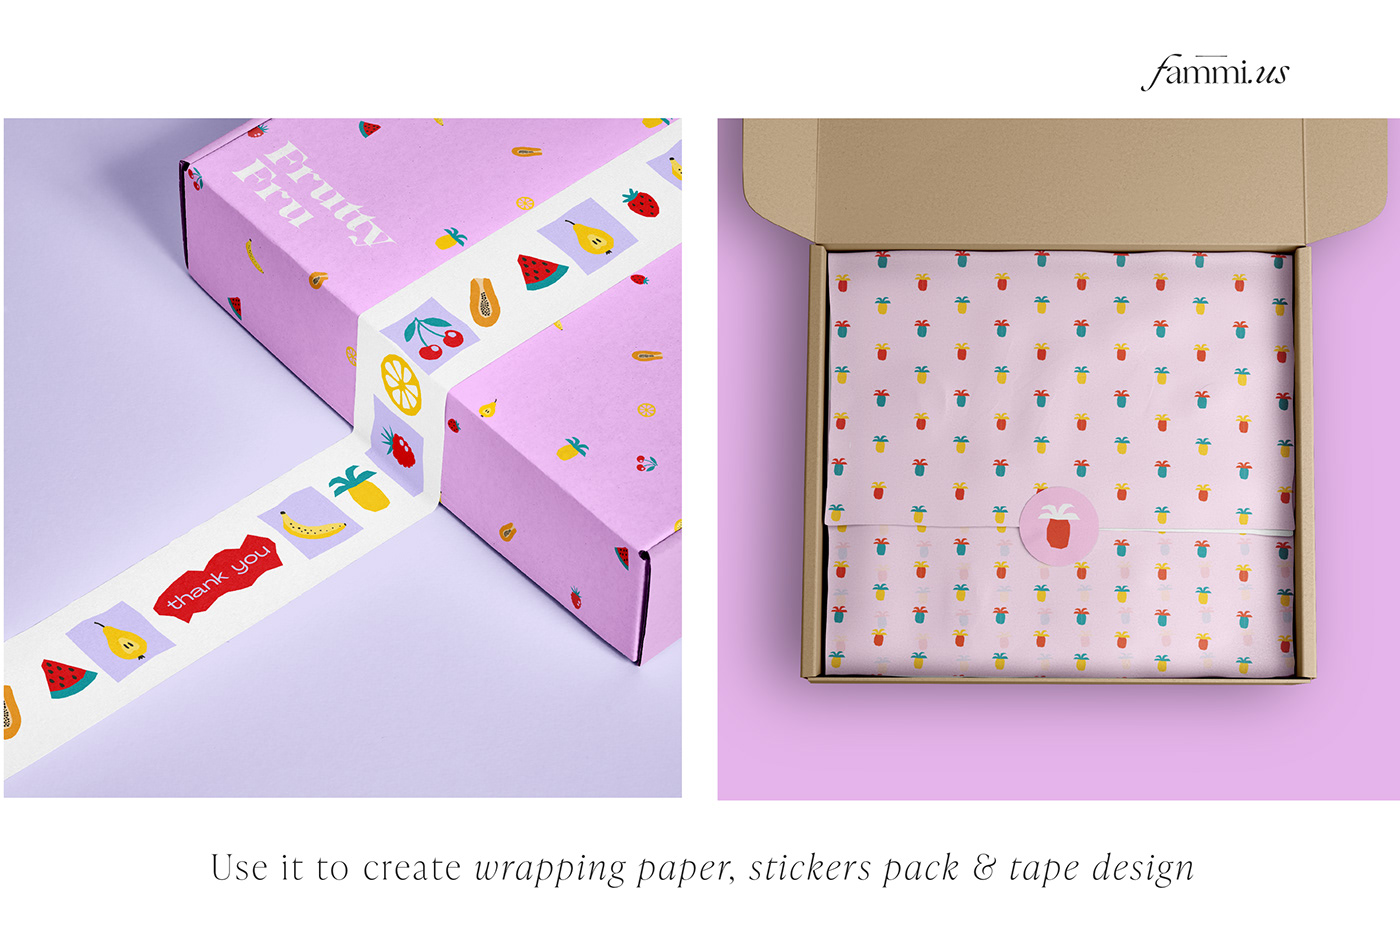 Wrapping paper and tape design on the packaging